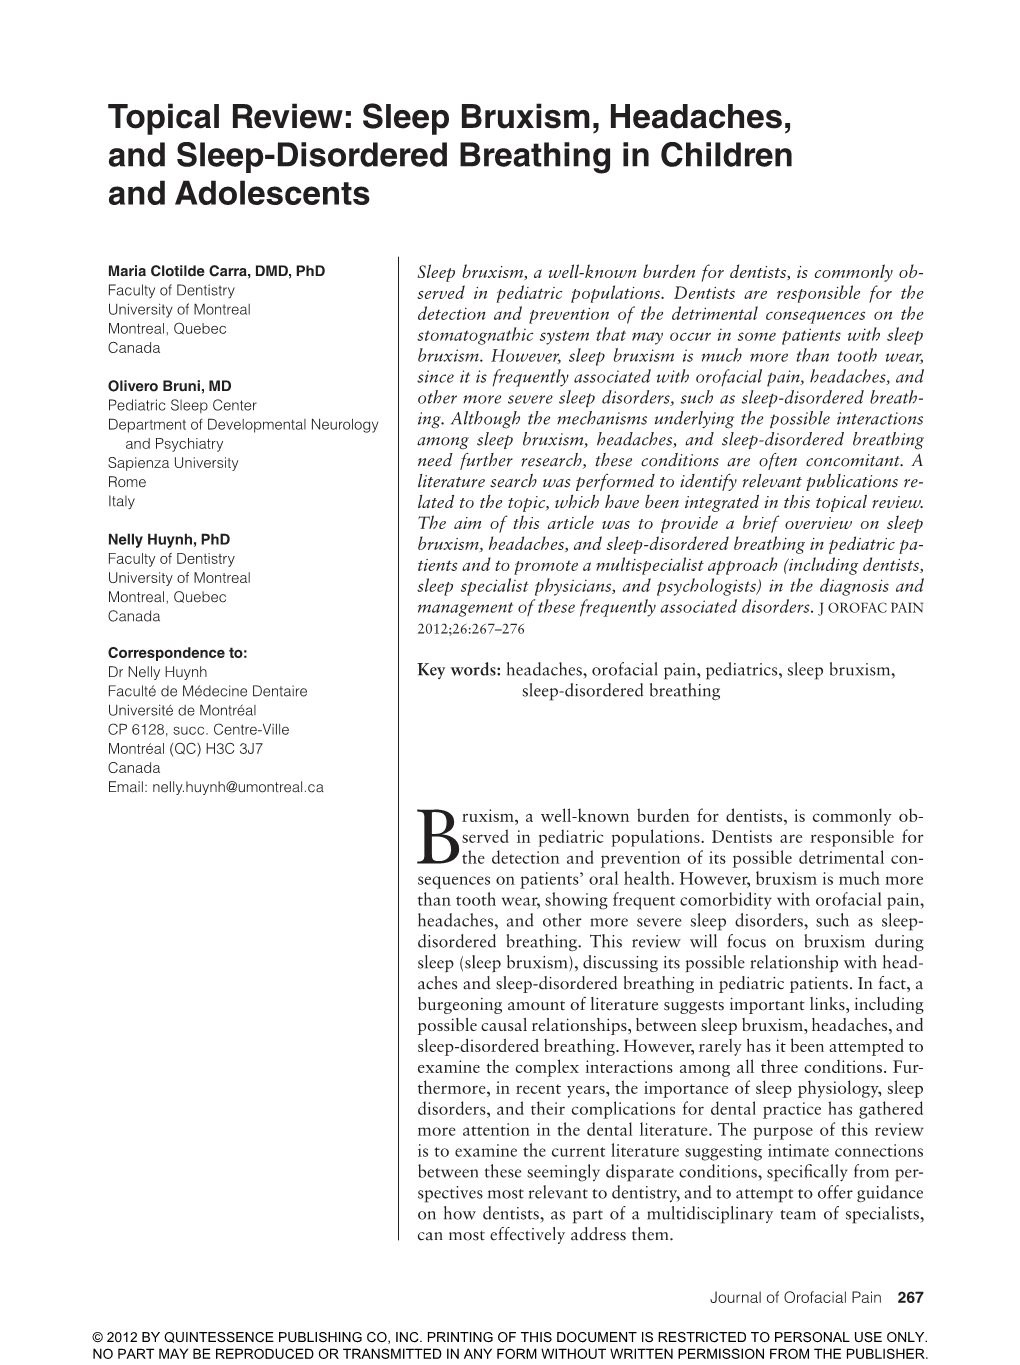 Sleep Bruxism, Headaches, and Sleep-Disordered Breathing in Children and Adolescents